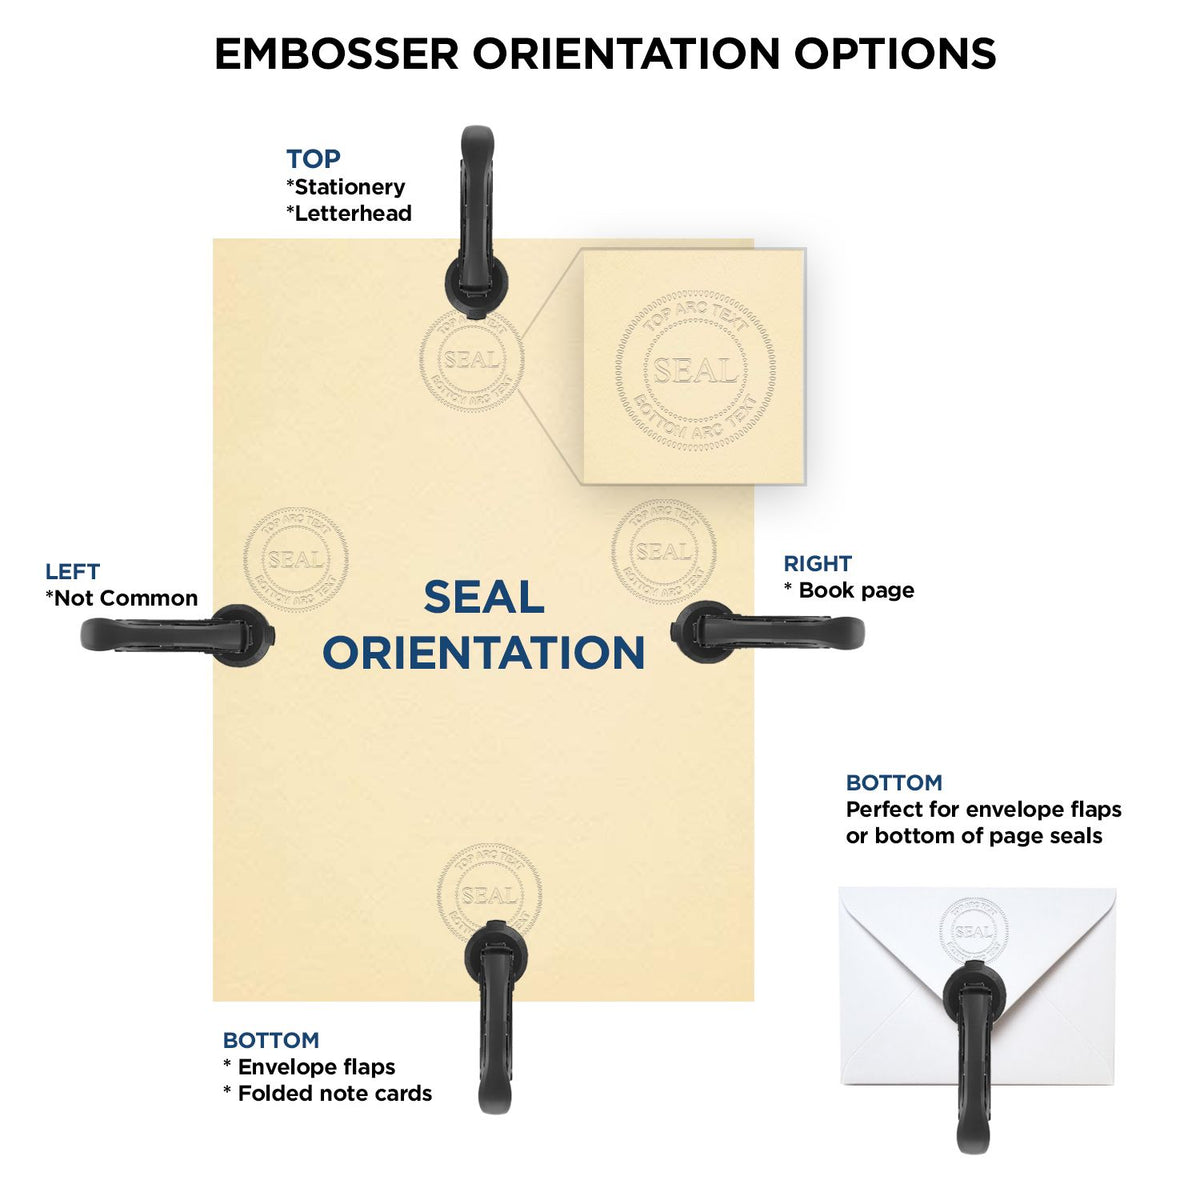 An infographic for the Handheld Oklahoma Professional Engineer Embosser showing embosser orientation, this is showing examples of a top, bottom, right and left insert.